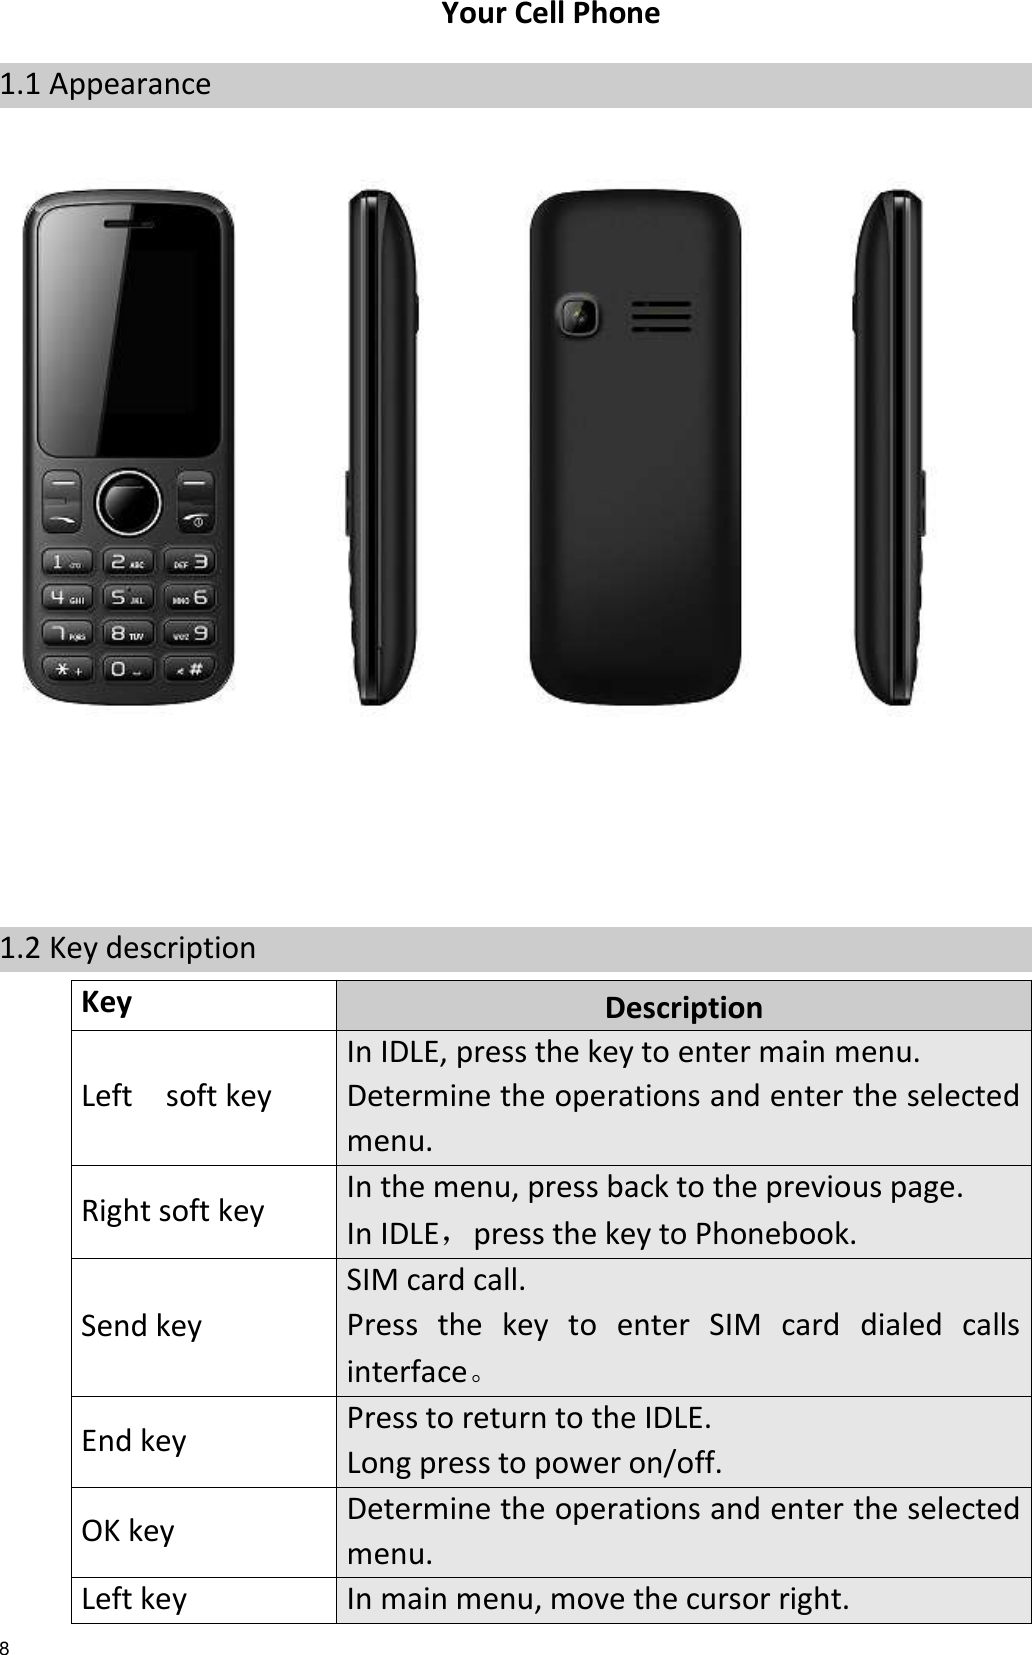   8 Your Cell Phone 1.1 Appearance      1.2 Key description Key Description Left    soft key In IDLE, press the key to enter main menu. Determine the operations and enter the selected menu. Right soft key In the menu, press back to the previous page. In IDLE，press the key to Phonebook. Send key SIM card call. Press  the  key  to  enter  SIM  card  dialed  calls interface。 End key Press to return to the IDLE. Long press to power on/off. OK key Determine the operations and enter the selected menu. Left key In main menu, move the cursor right. 